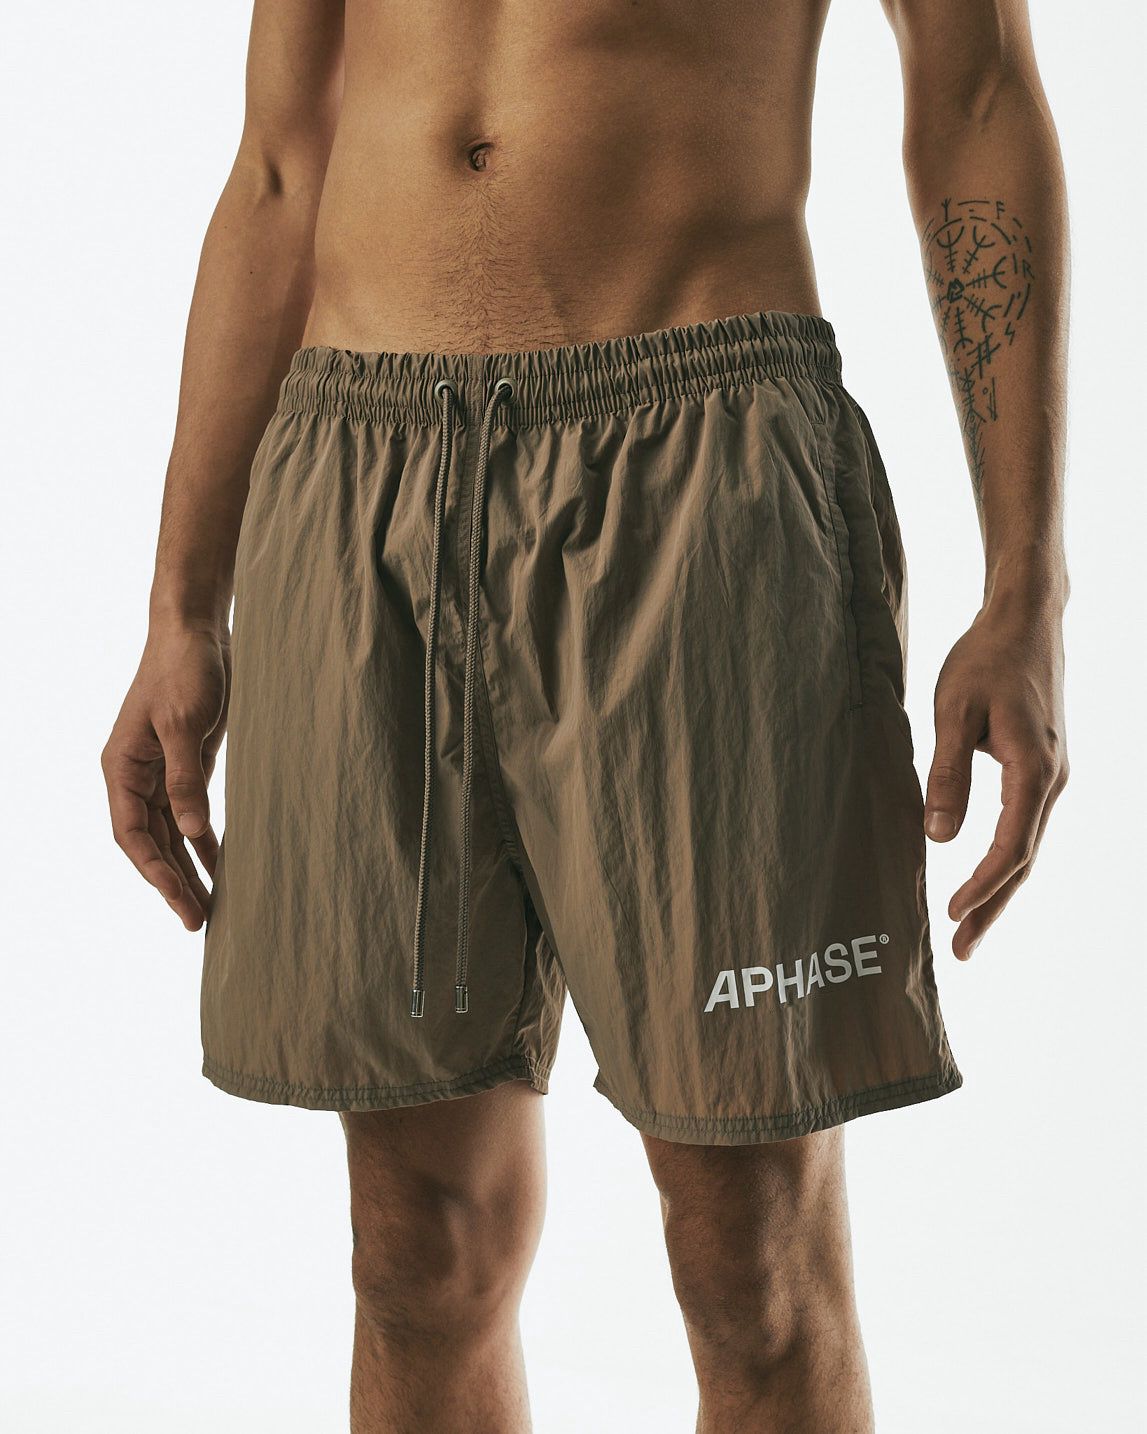 APHASE - Soft Shorts Brown